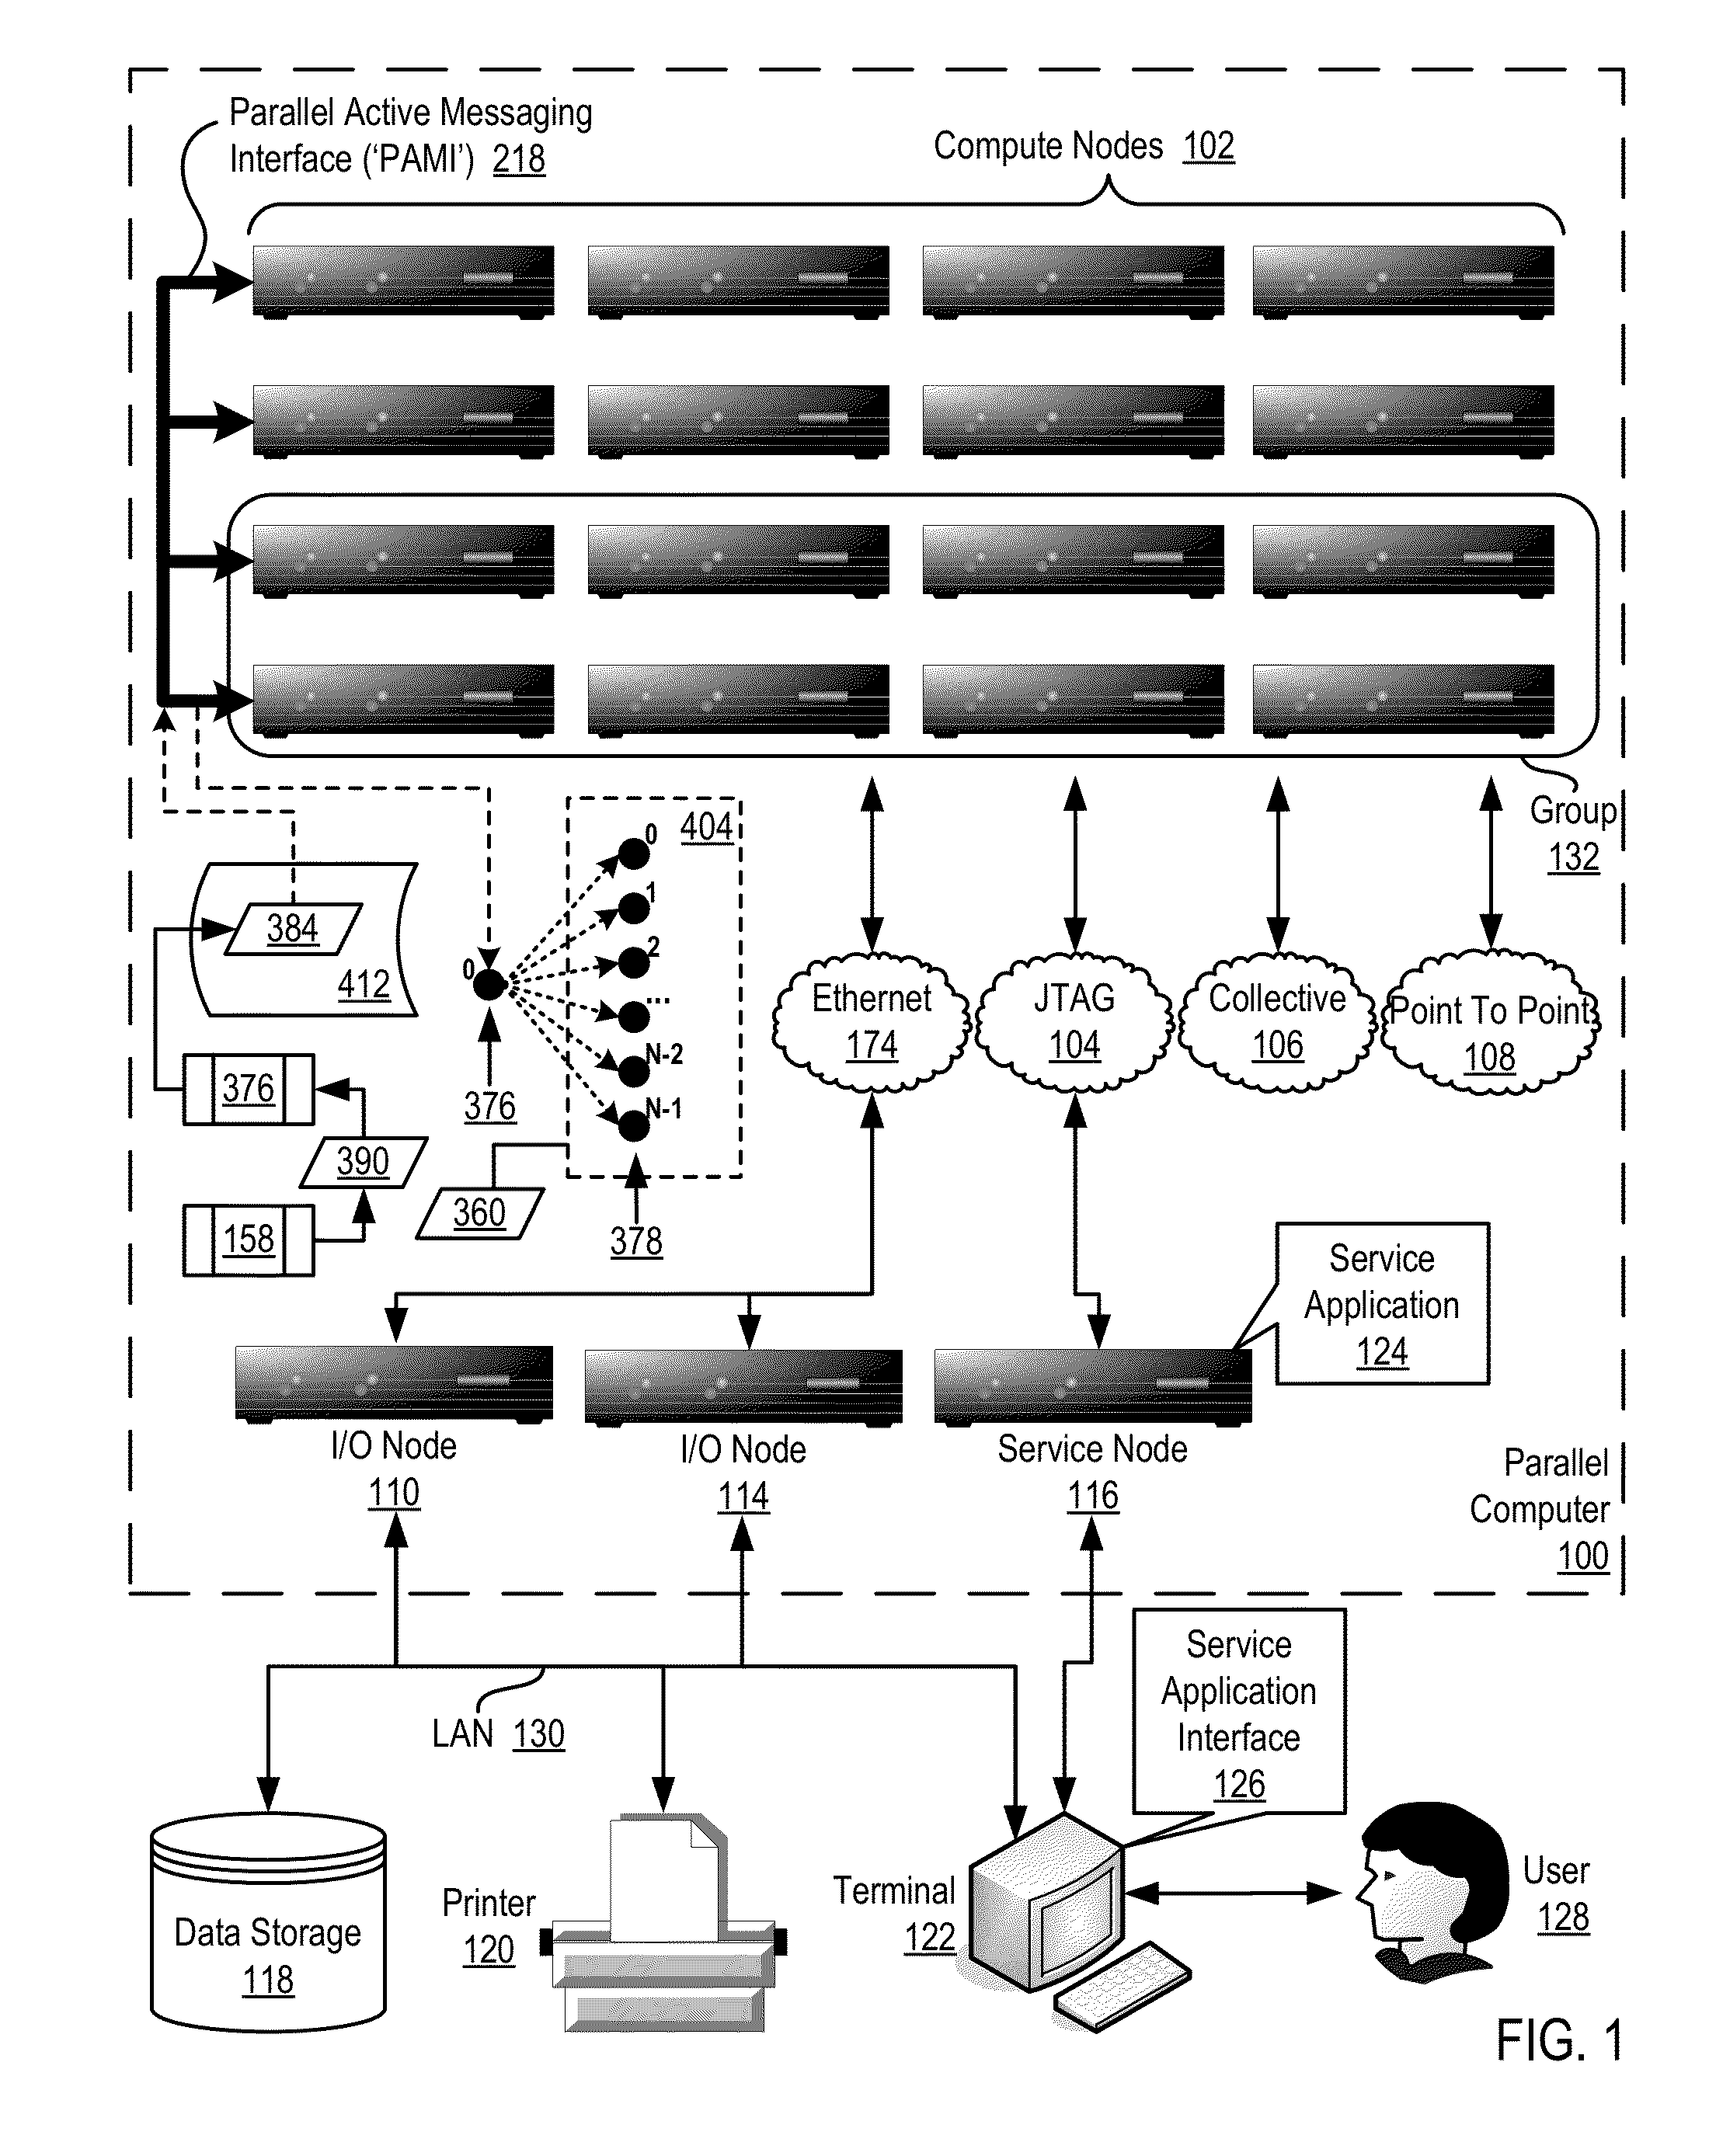 Endpoint-based parallel data processing with non-blocking collective instructions in a parallel active messaging interface of a parallel computer